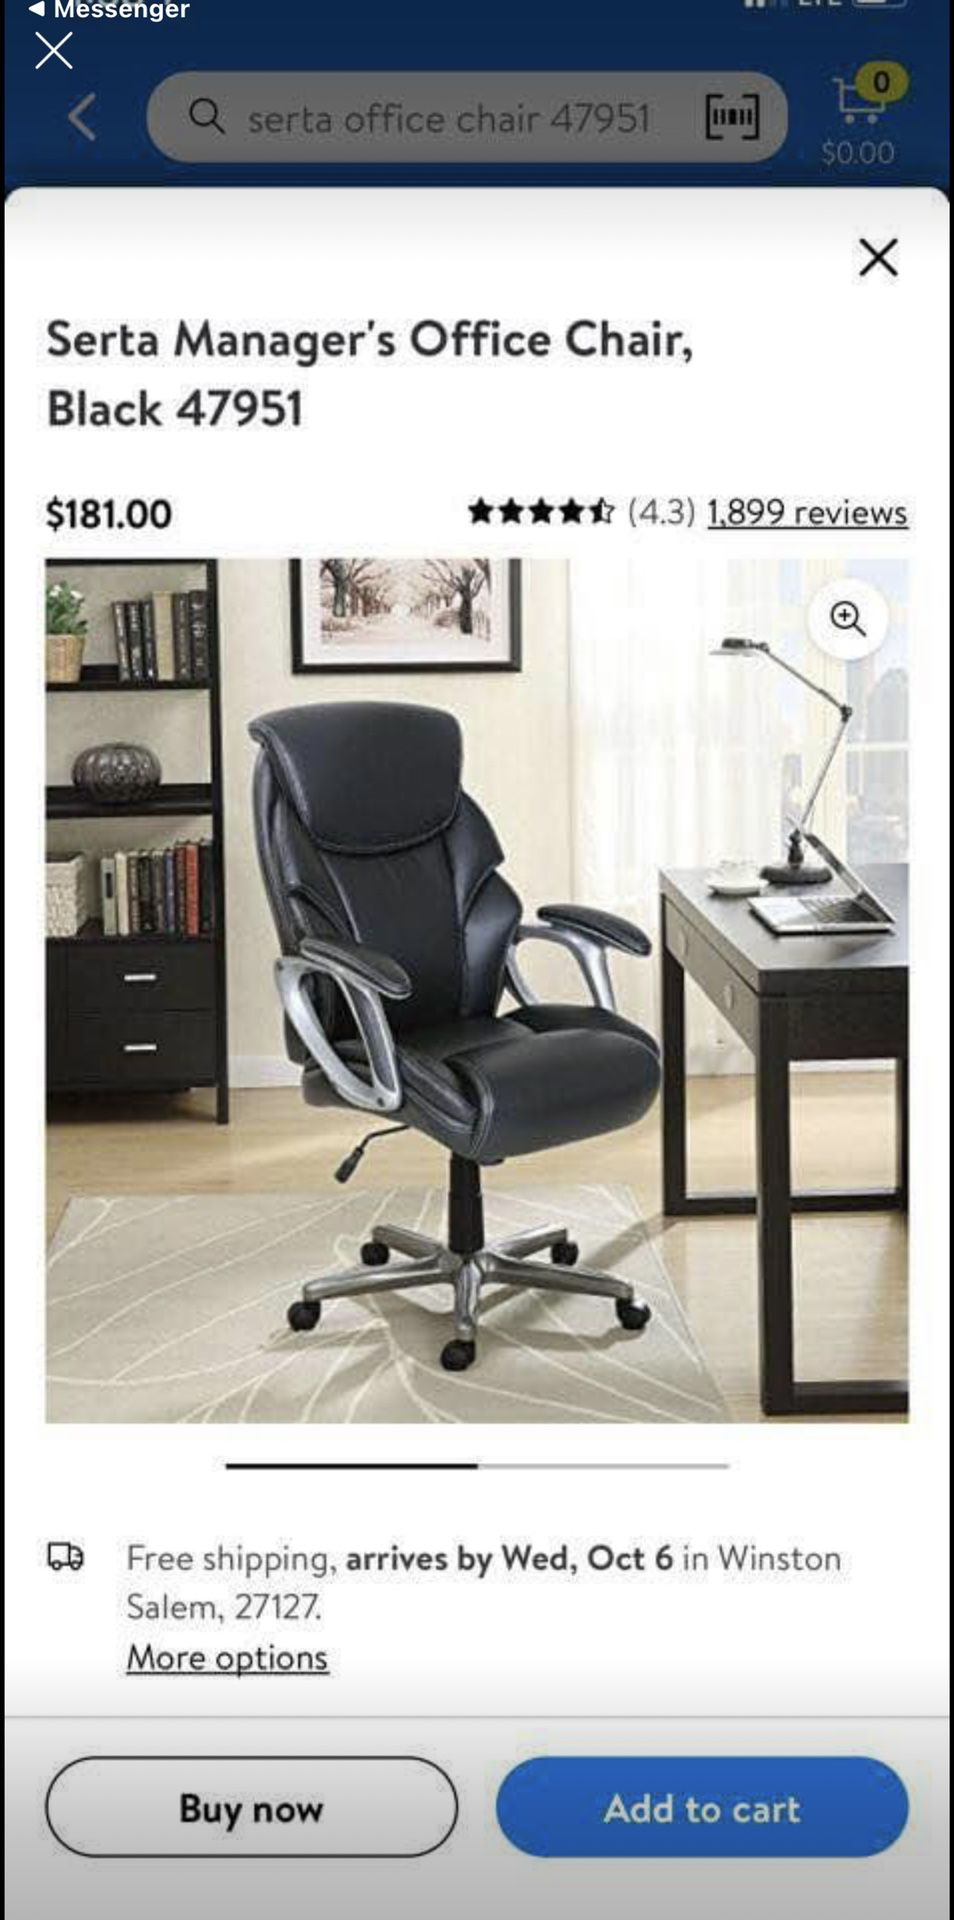 Serta Manager’s Office Chair